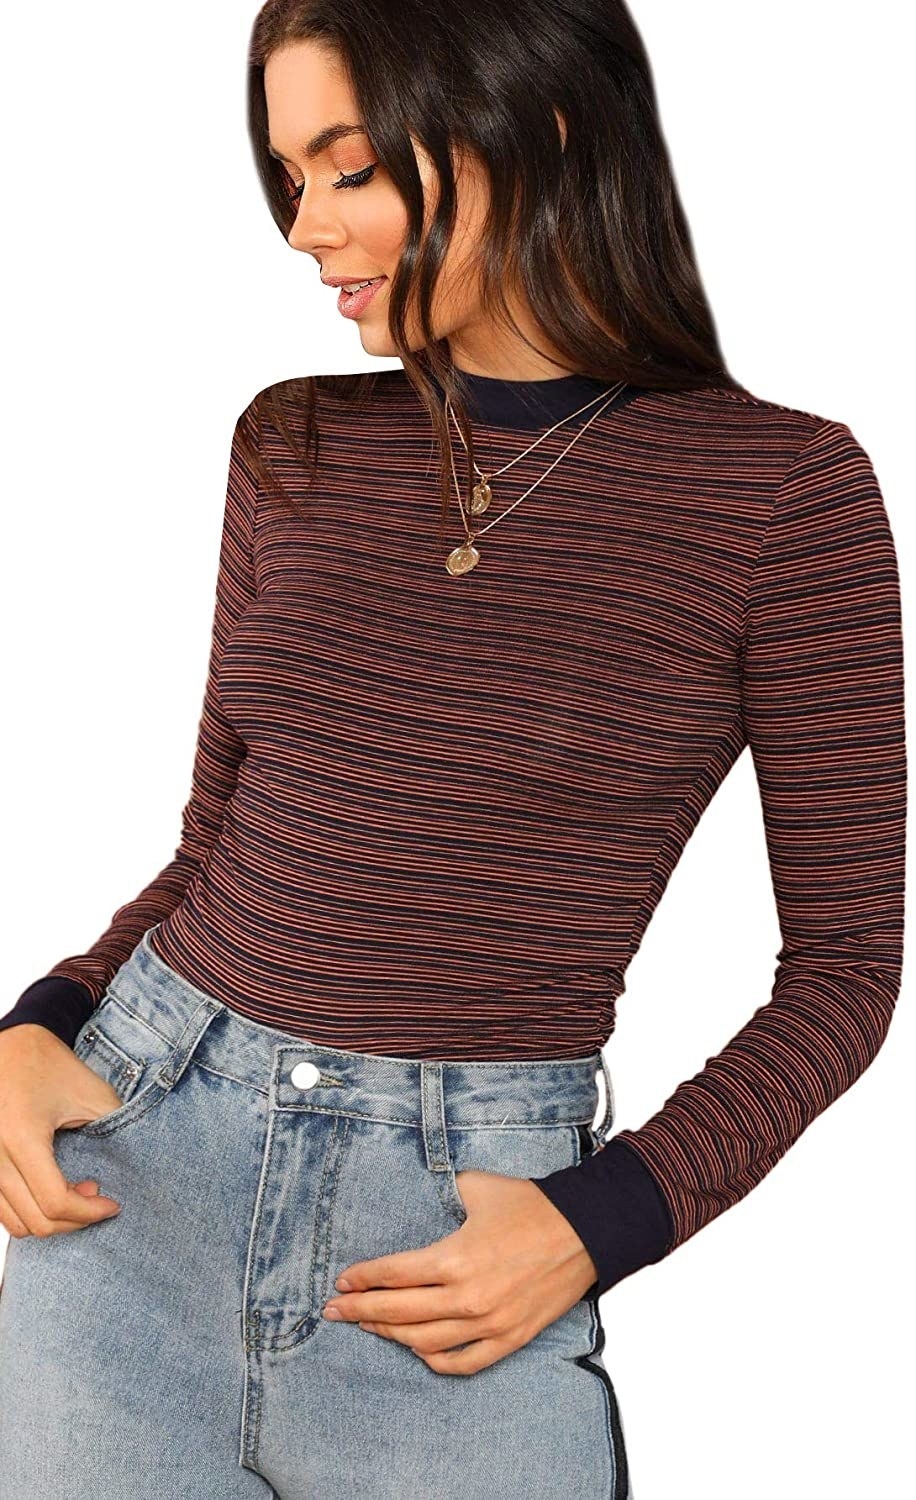 22 Tops You'll Probably Want To Add To Your Fall Wardrobe